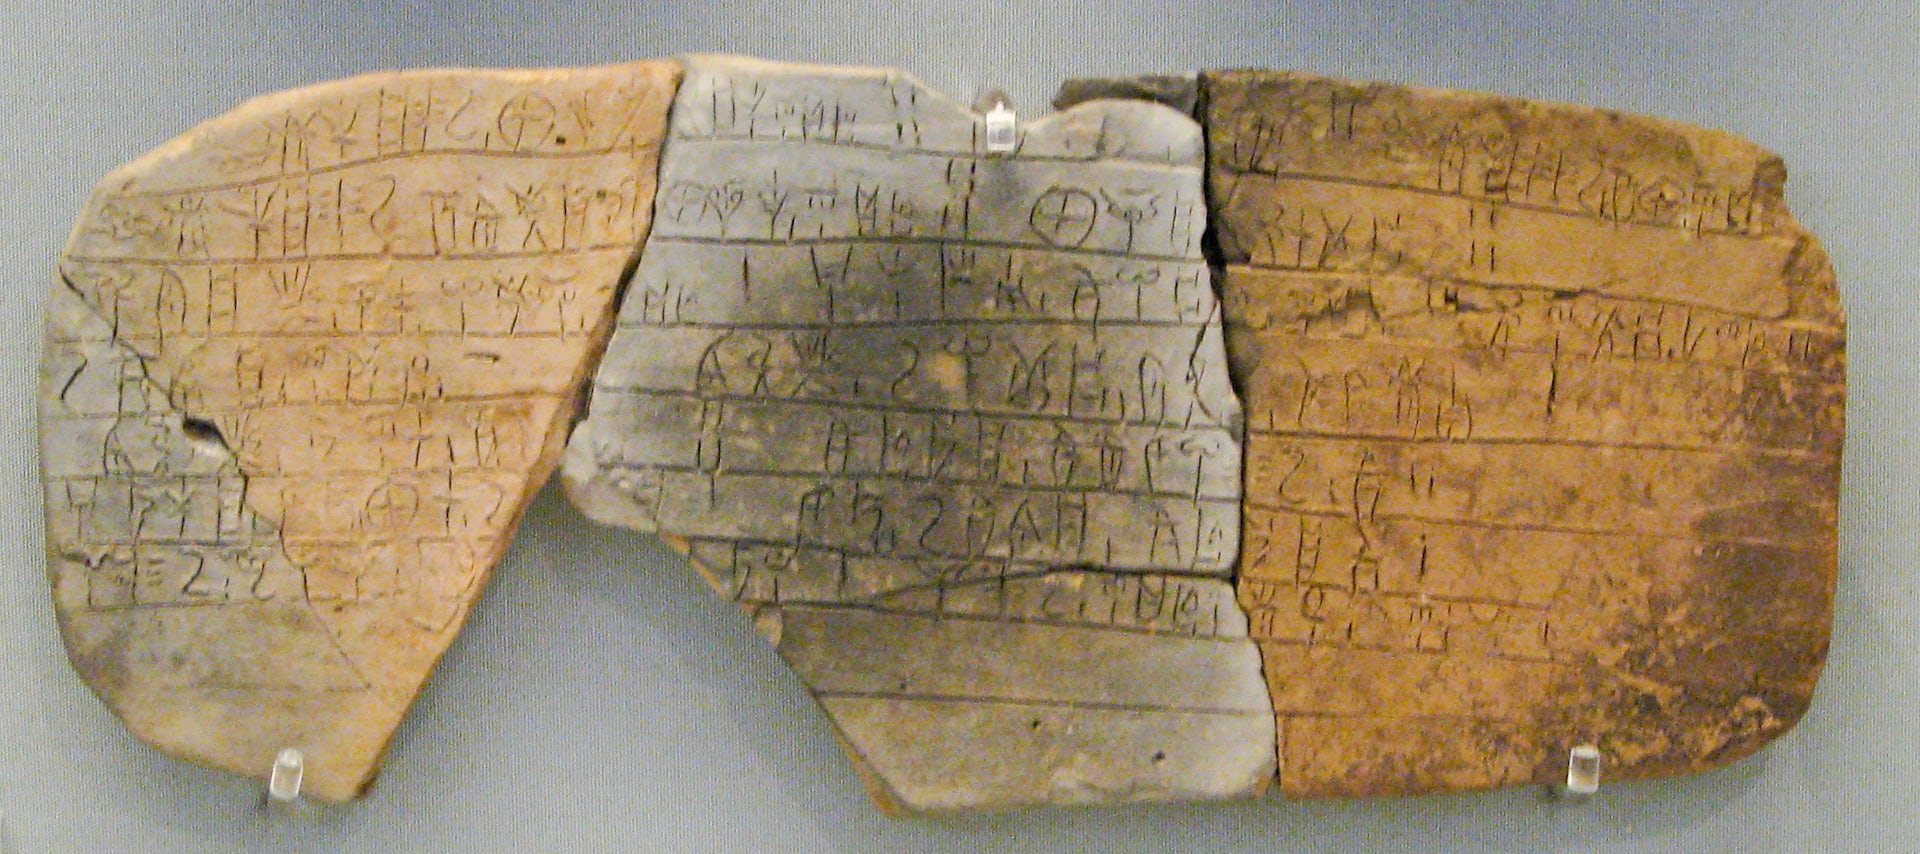 Linear B tablet from Pylos